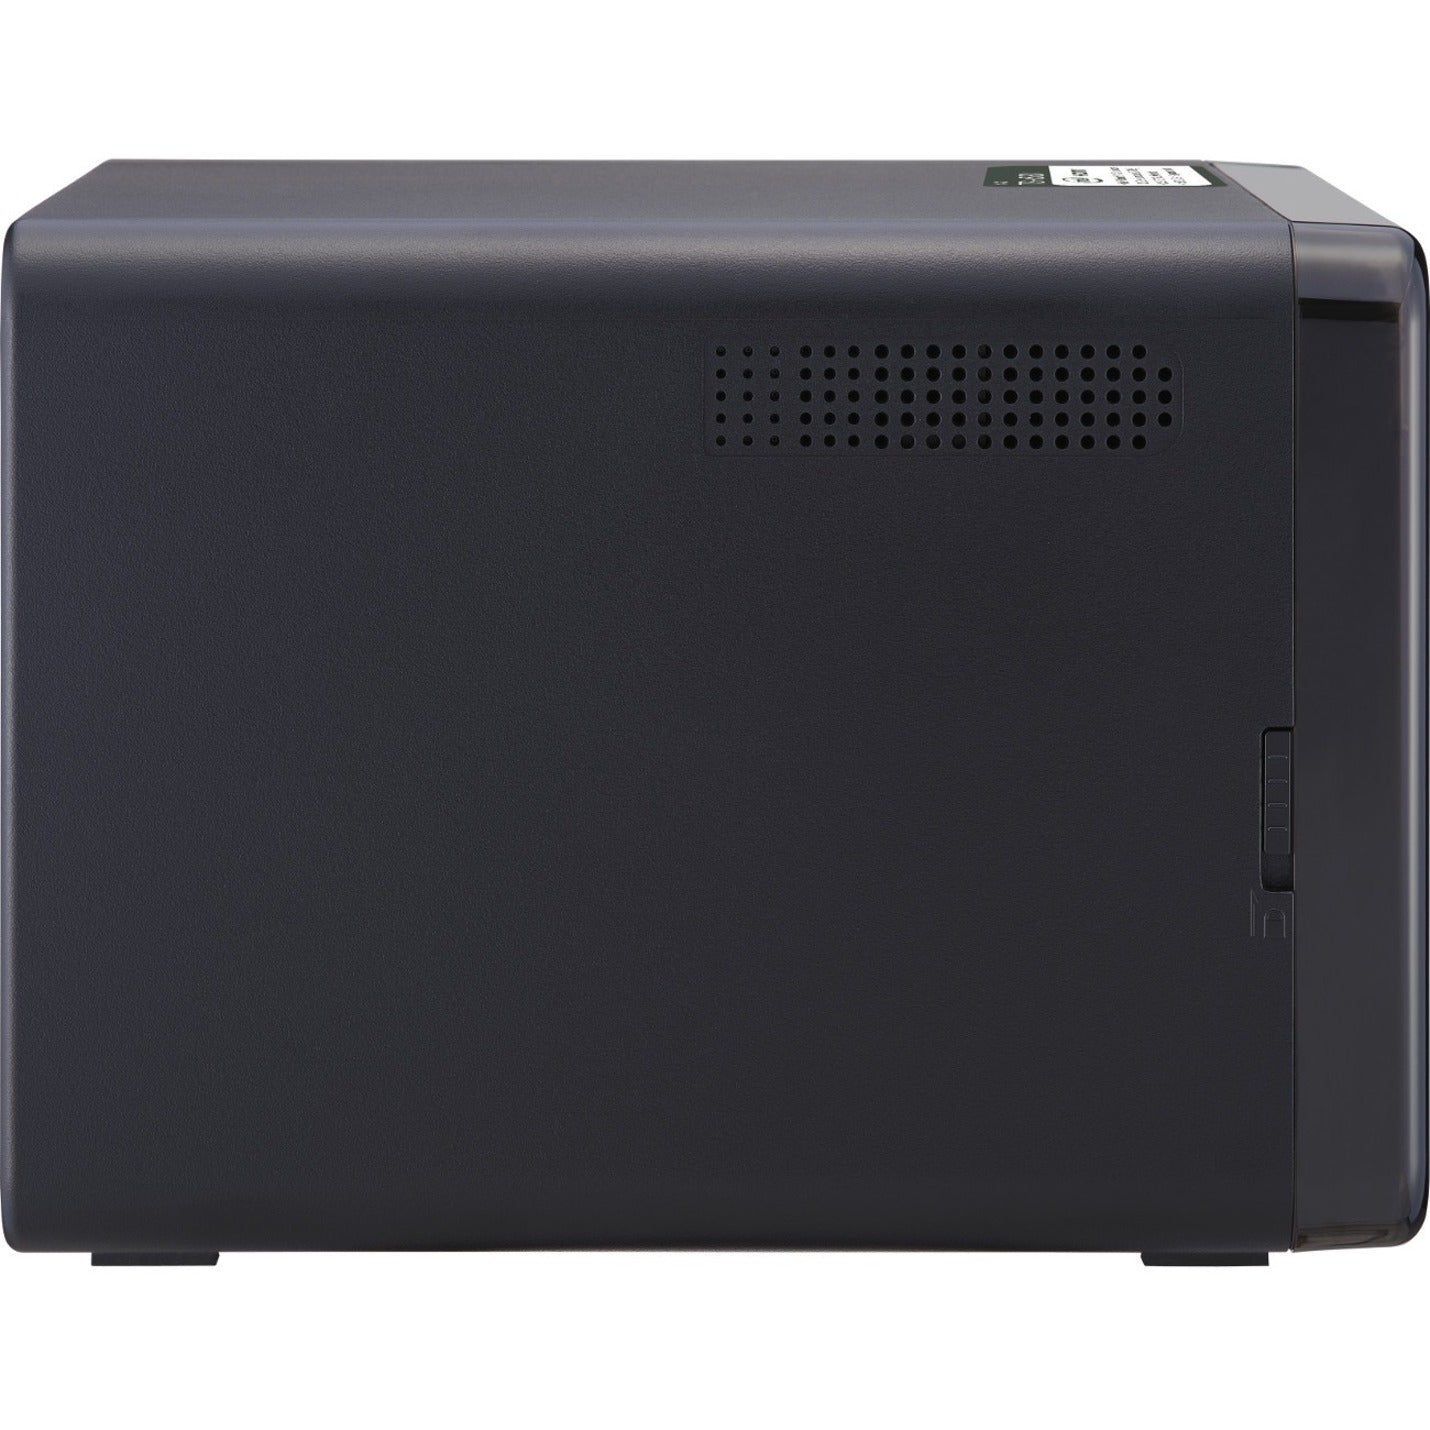 QNAP TS-453D-4G-US Professional Quad-core 2.0 GHz NAS with 2.5GbE Connectivity and PCIe Expansion, Intel Celeron J4125, 4GB RAM